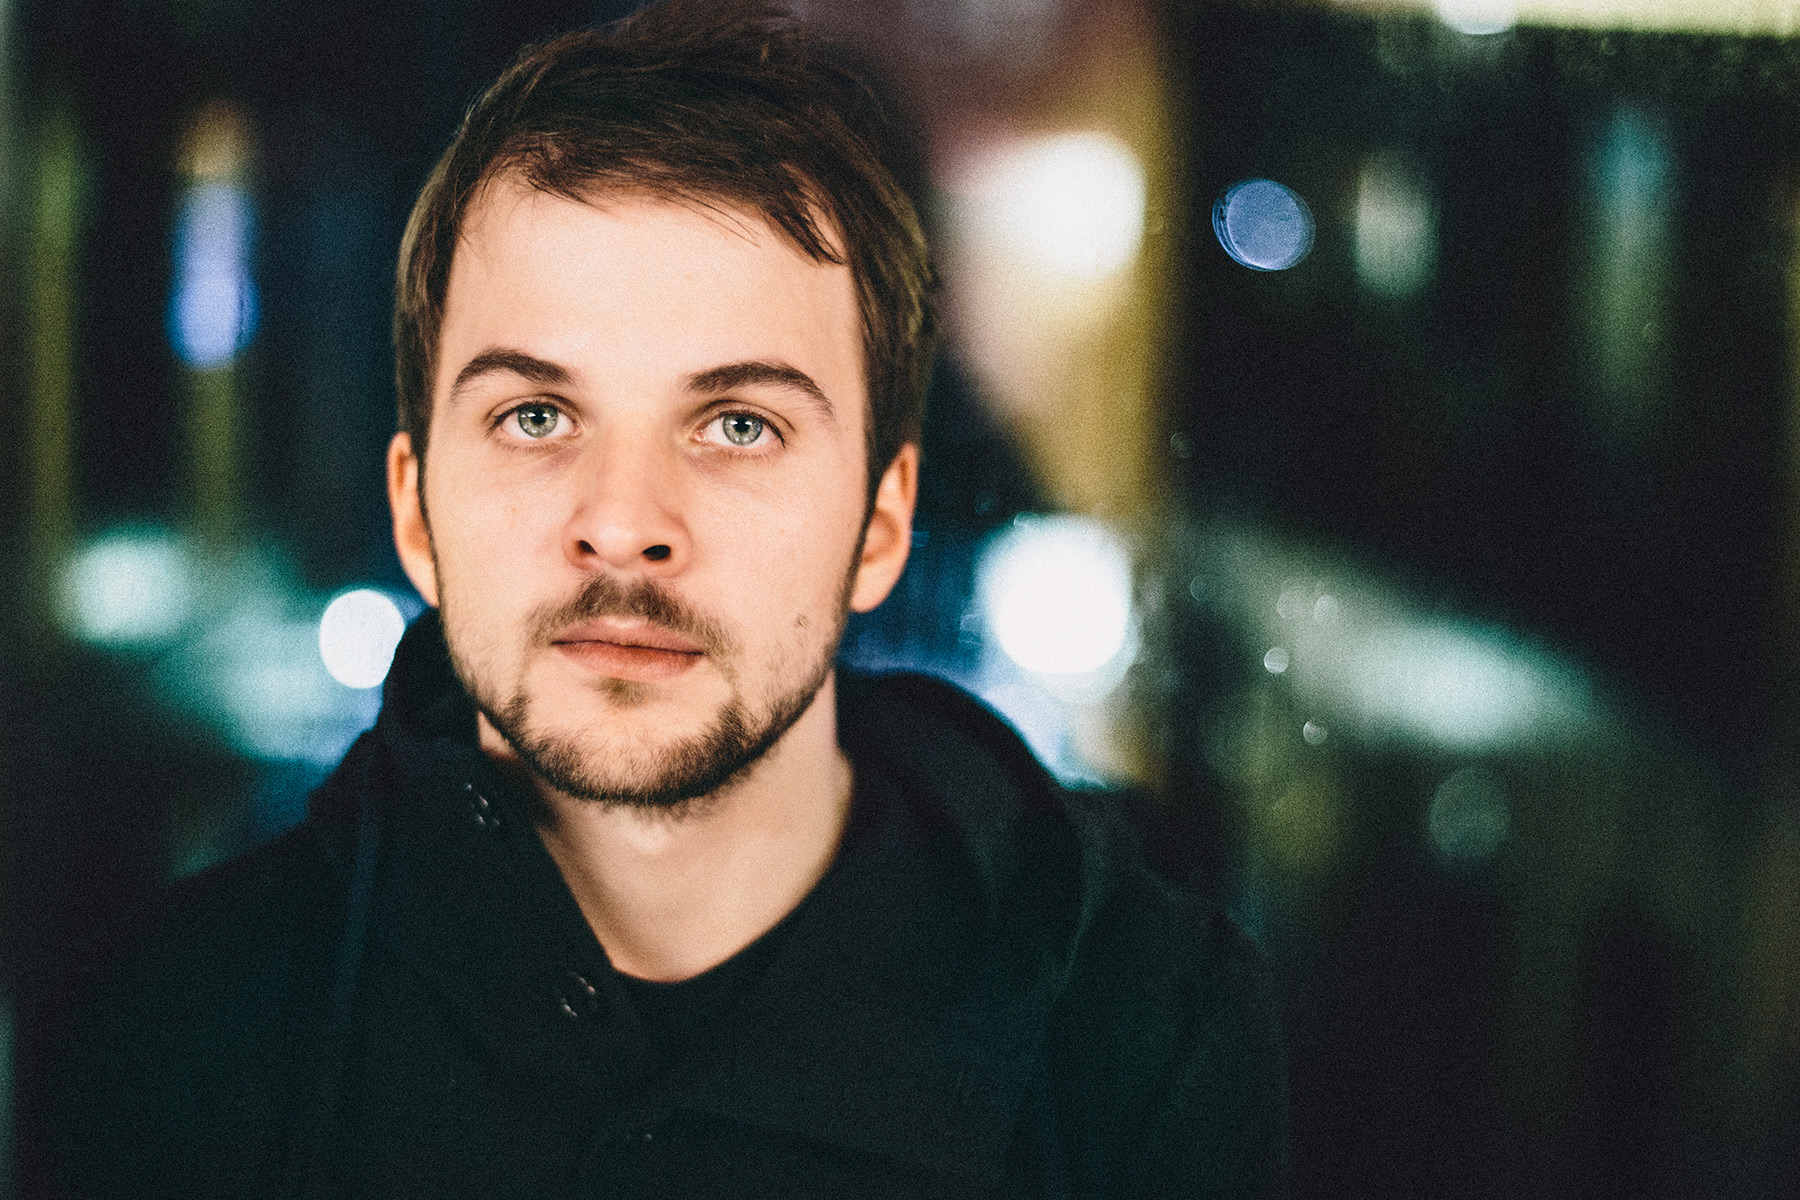 Pictures and Portraits of Nils Frahm playing at koncerthuset